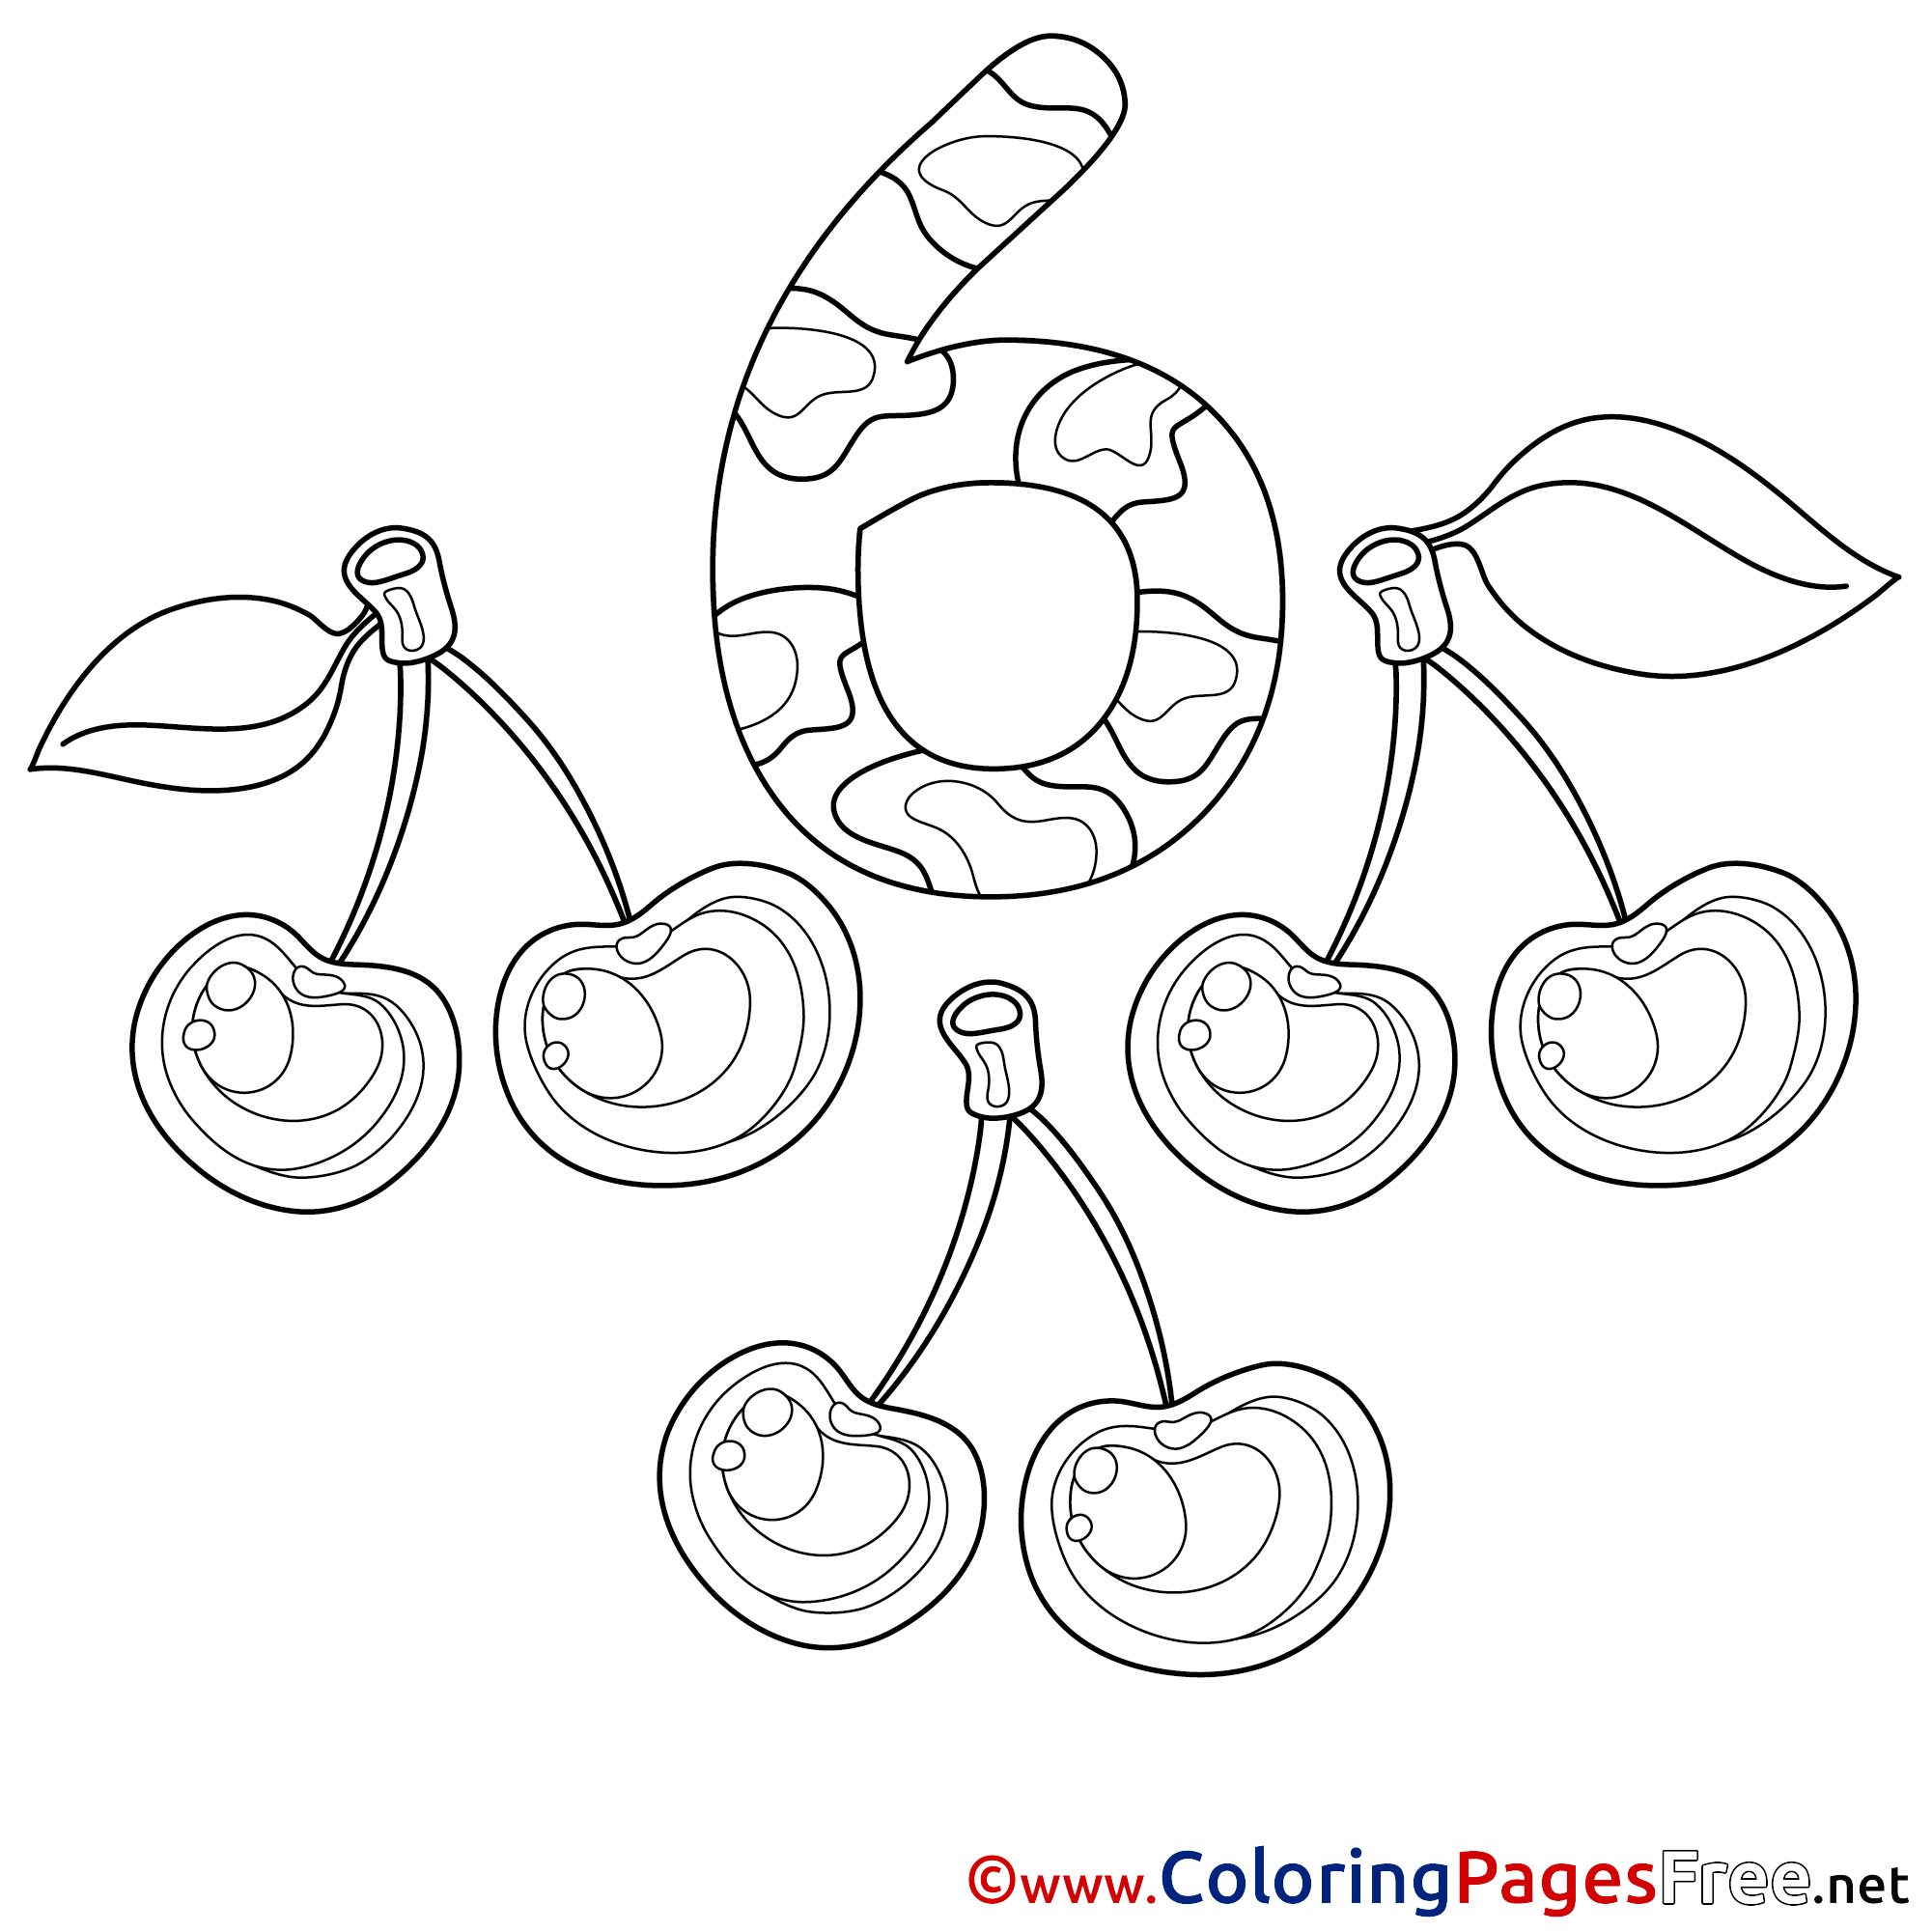 6 Cherries Coloring Sheets Numbers free